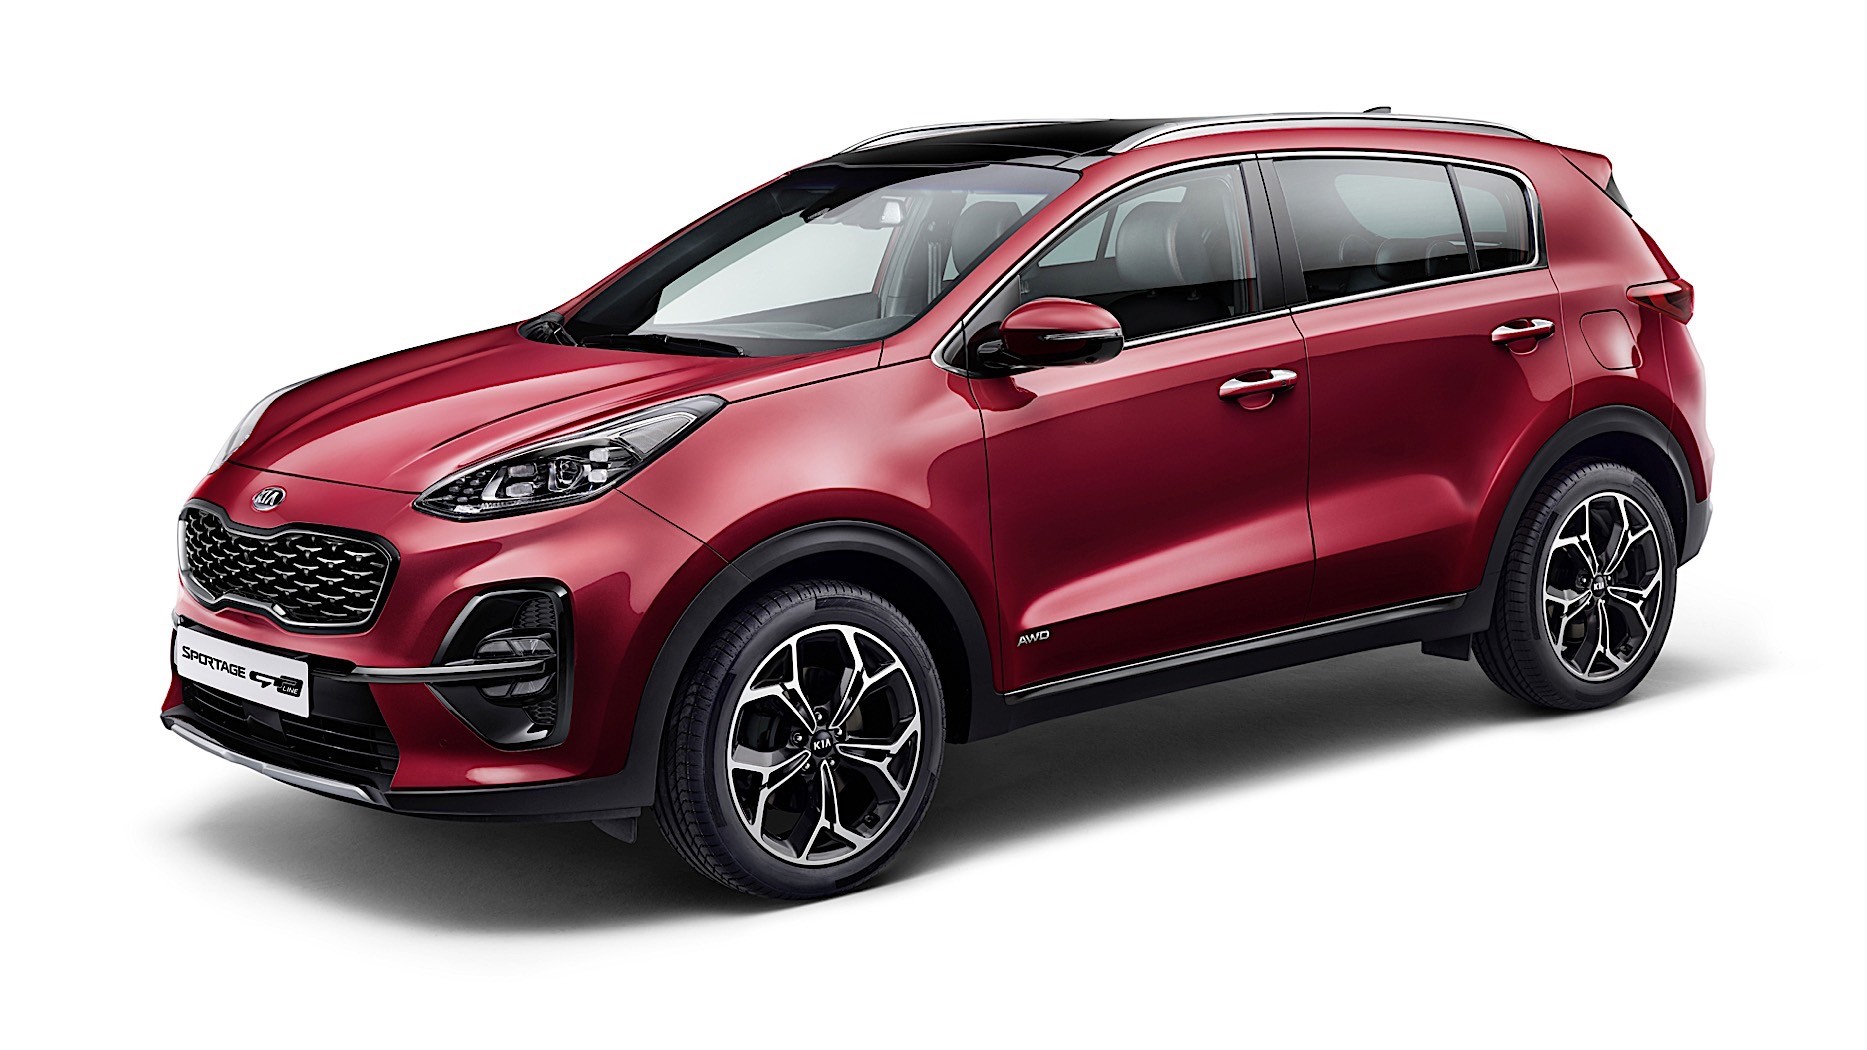 2022 Kia Sportage Gains New Tech and More Standard Features, Starts